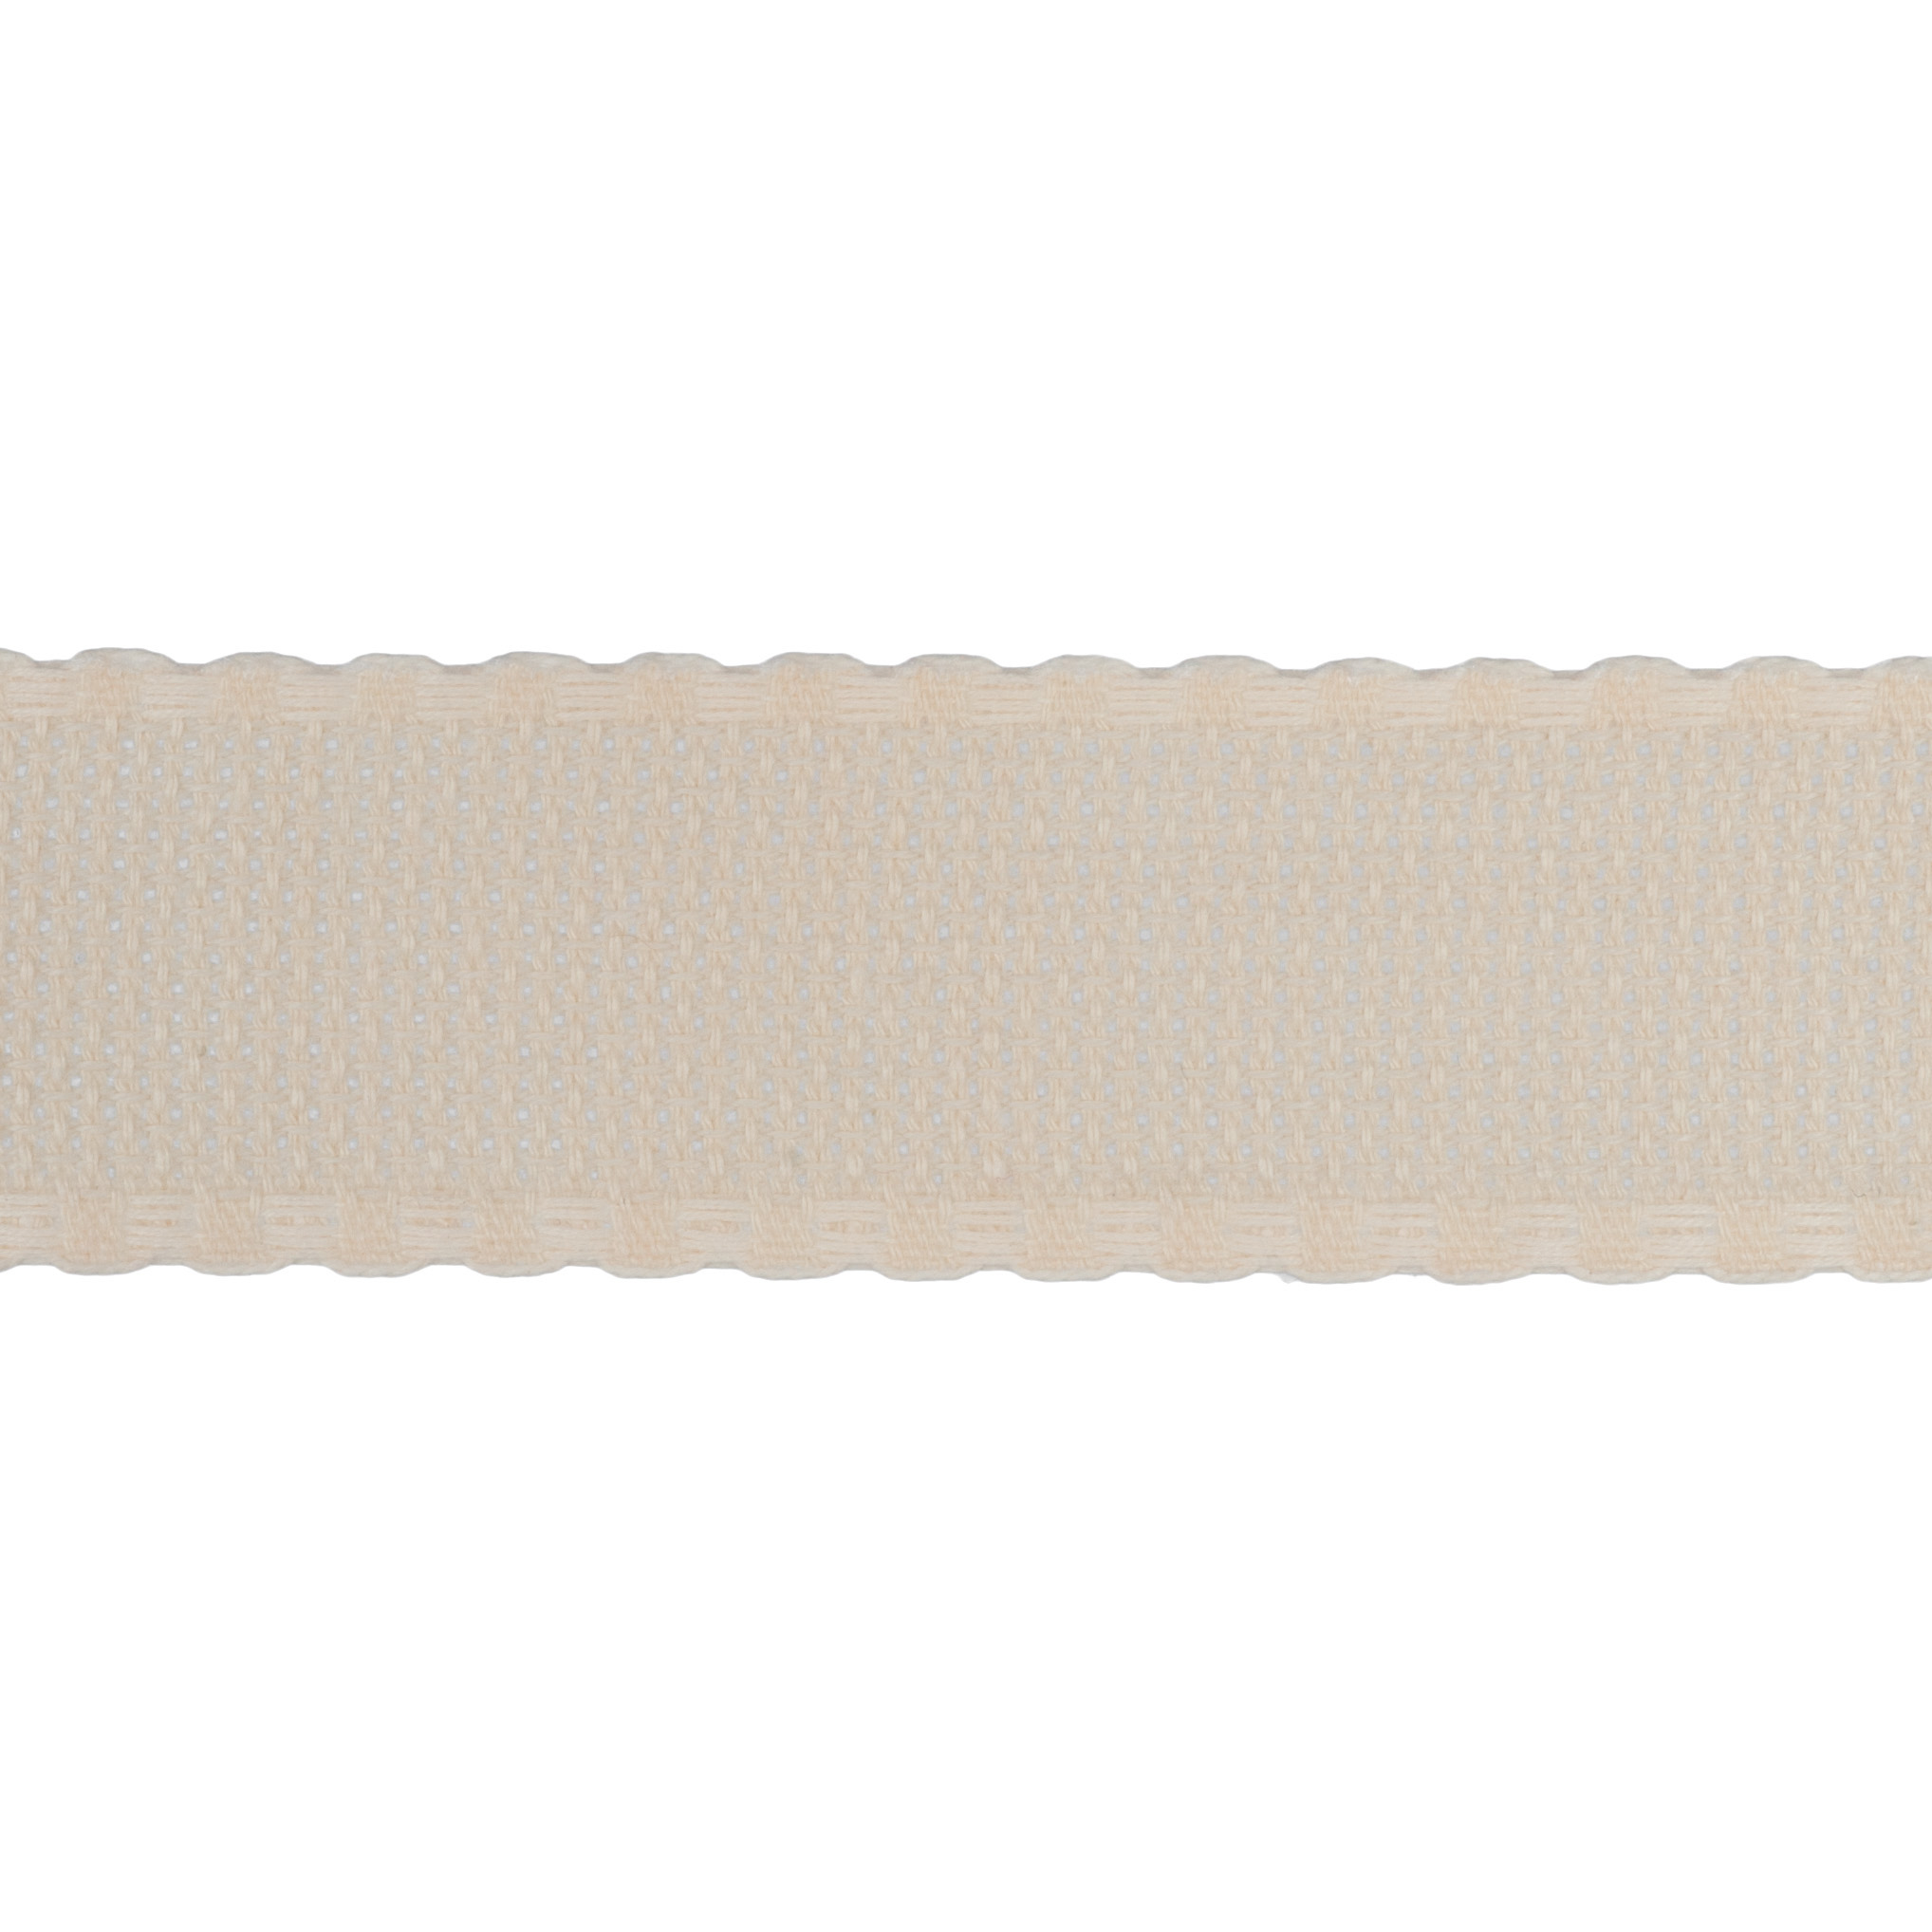 Picture of Needlecraft Fabric: Aida Band: 16 Count: 8m x 70mm: Cream